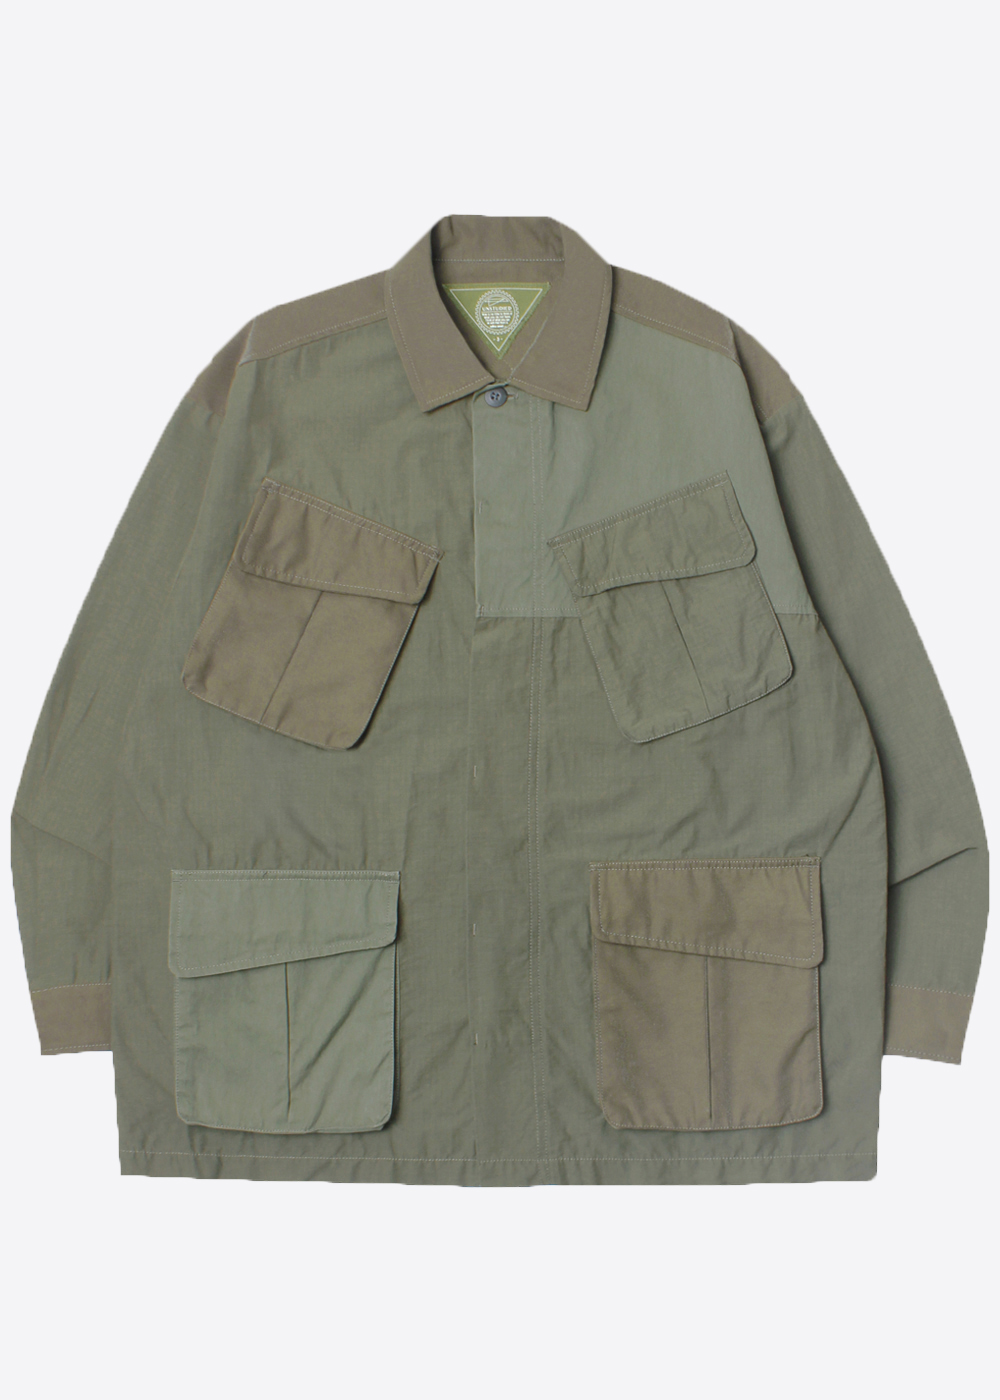 UNSTUIDIED BY NIKO AND’over fit’patchwork m-65 motive filed parka